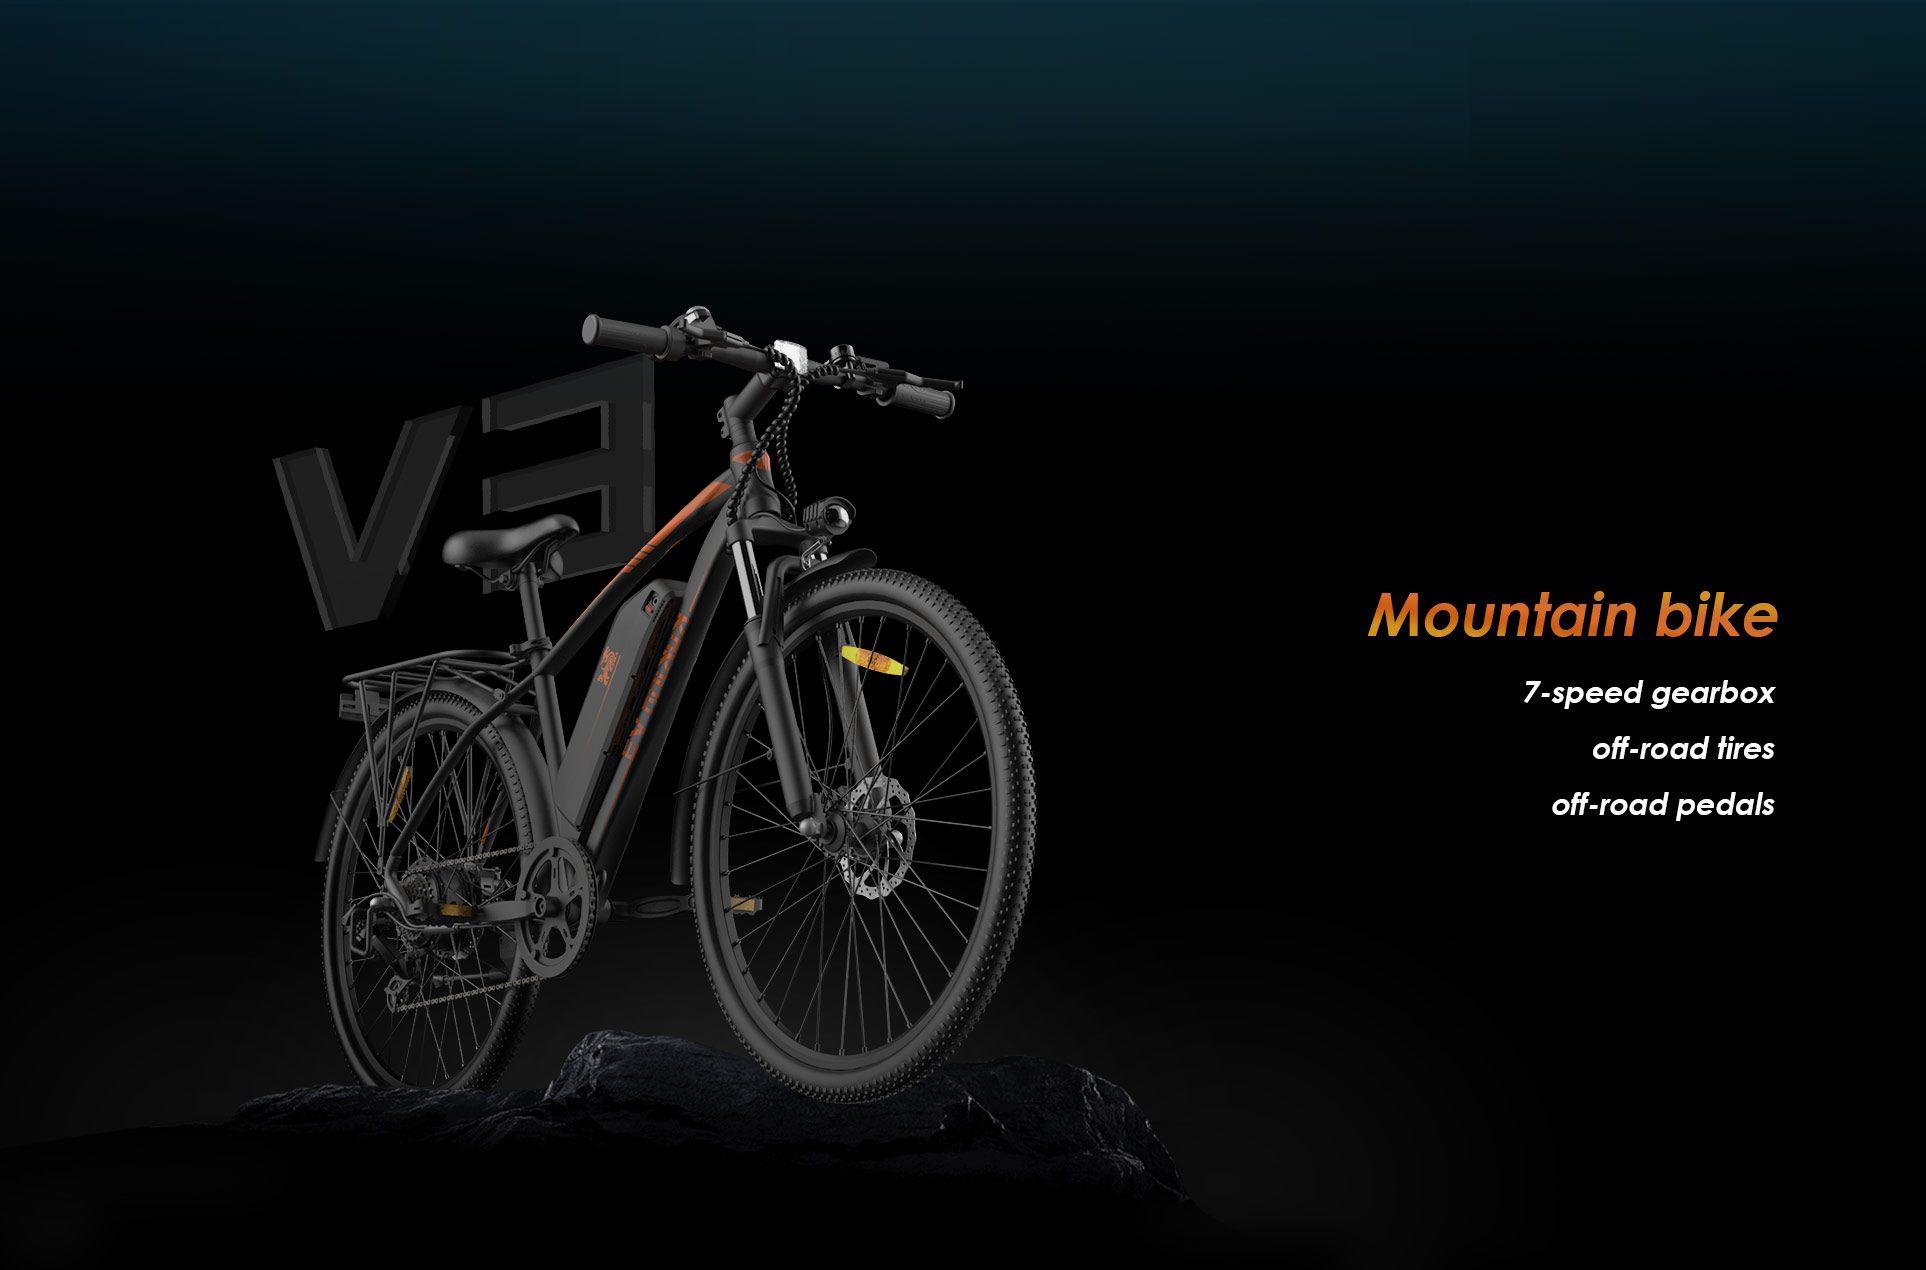 KuKirin V3 Electric Mountain Bike, 27.5 Tires, 15Ah Removable Battery, 90km Max Assistant Mileage, 40km/h Max Speed